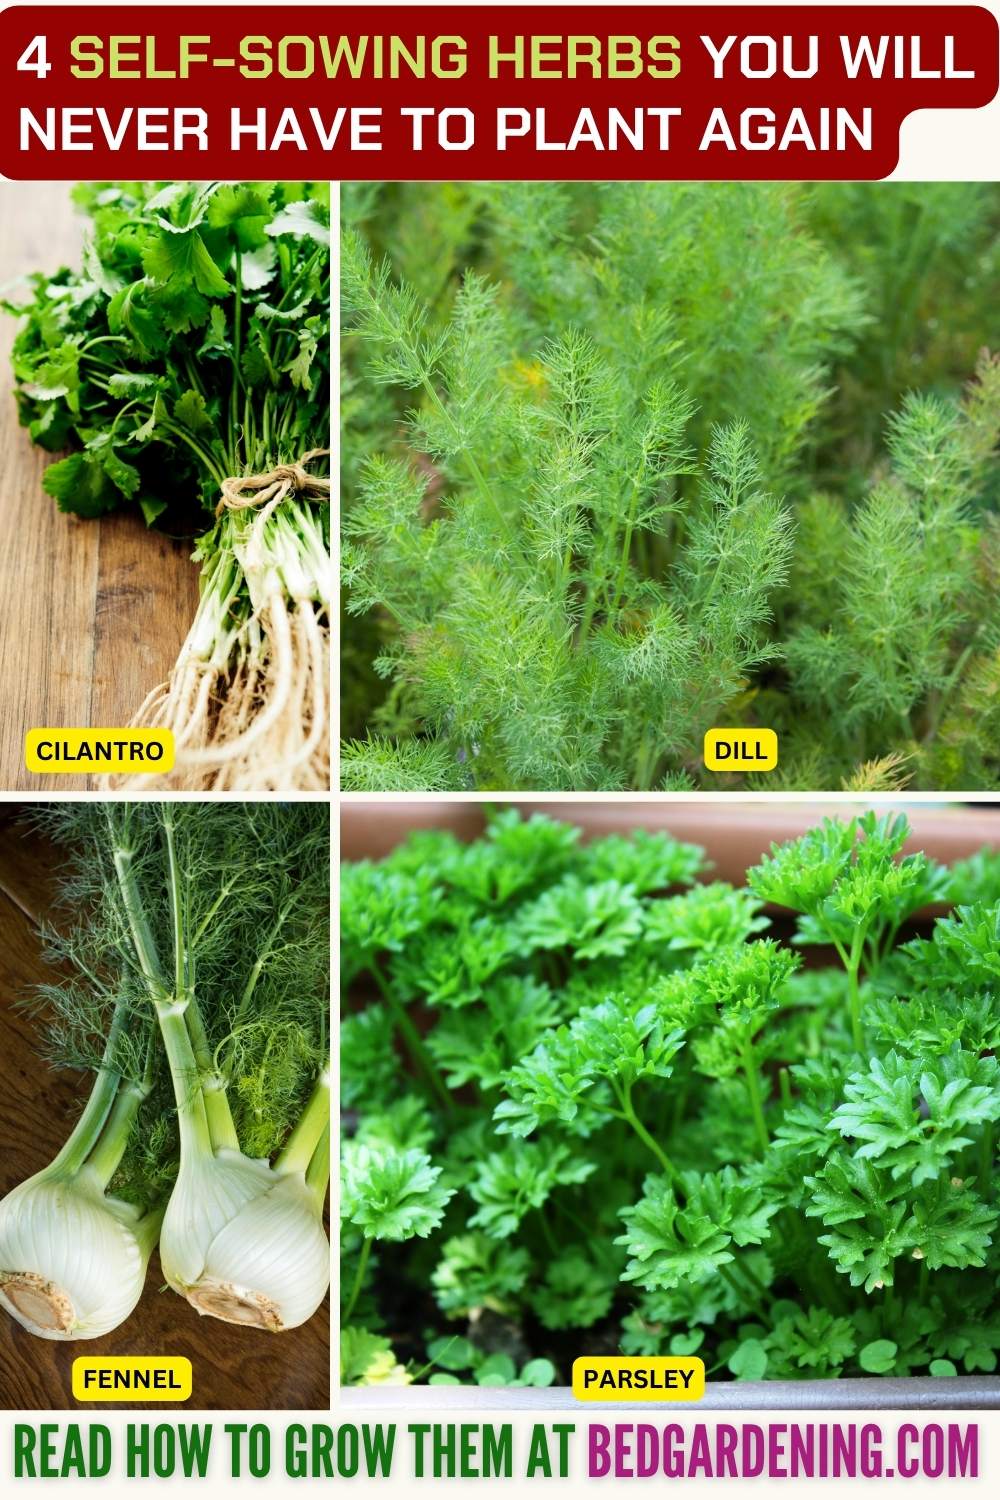 4 Self-Sowing Herbs You Will Never Have To Plant Again